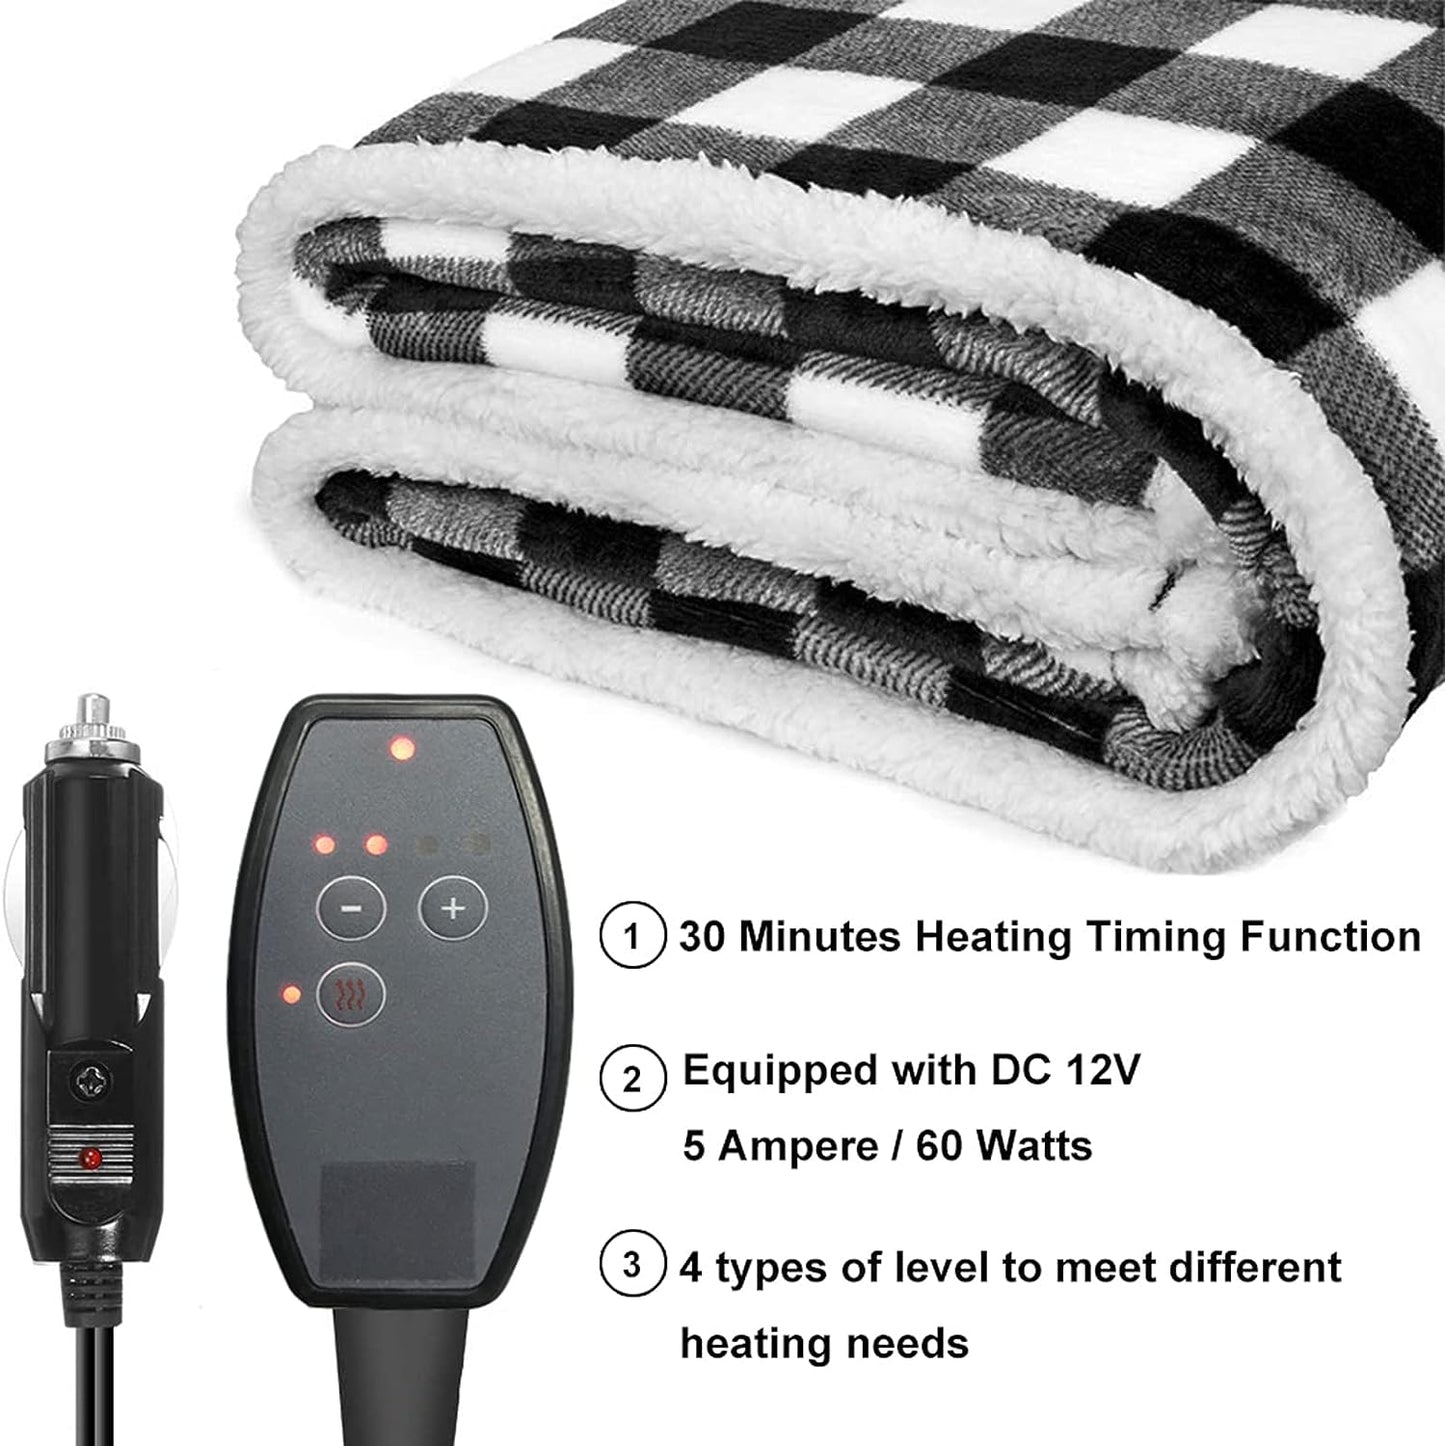 Big Ant Heated Blanket, Electric Blanket Throw 58.3"x 41.76", Easy Controller Fast Heating Levels, UL Certification, Overheating Protection